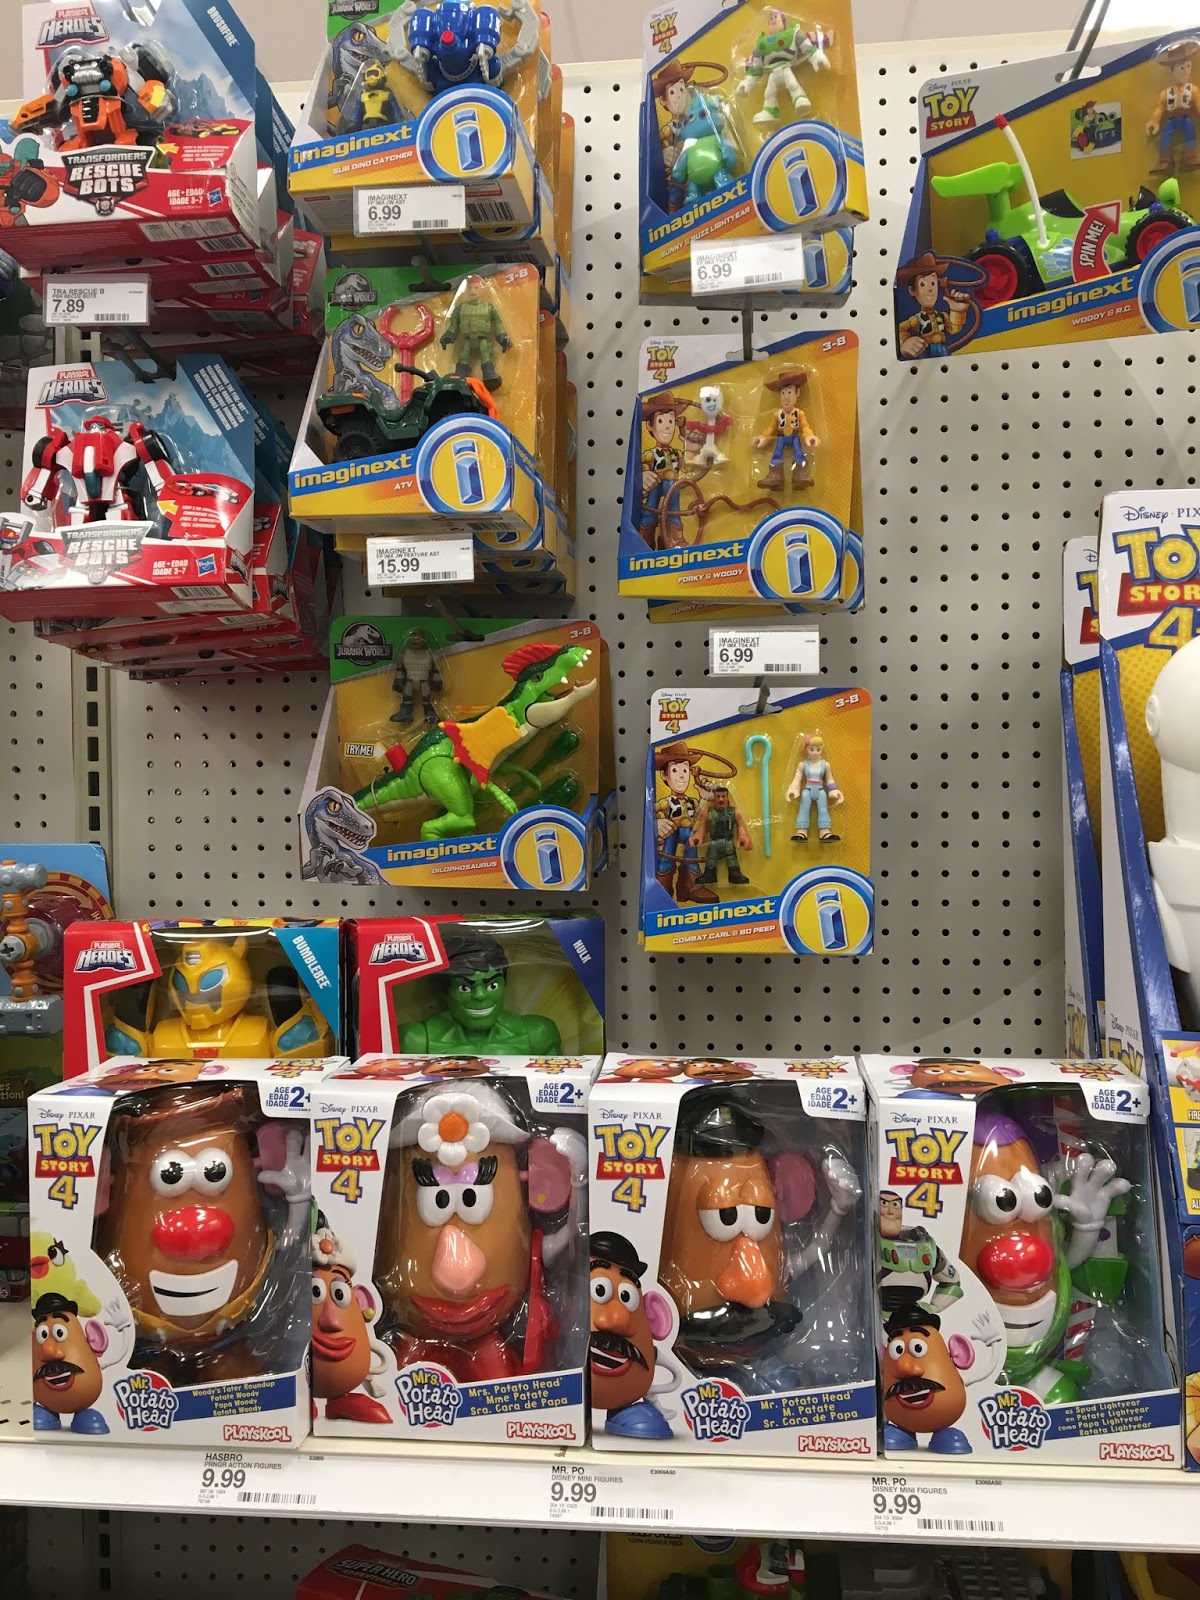 Dan The Pixar Fan Events Toy Story 4 Toys—officially Out Now